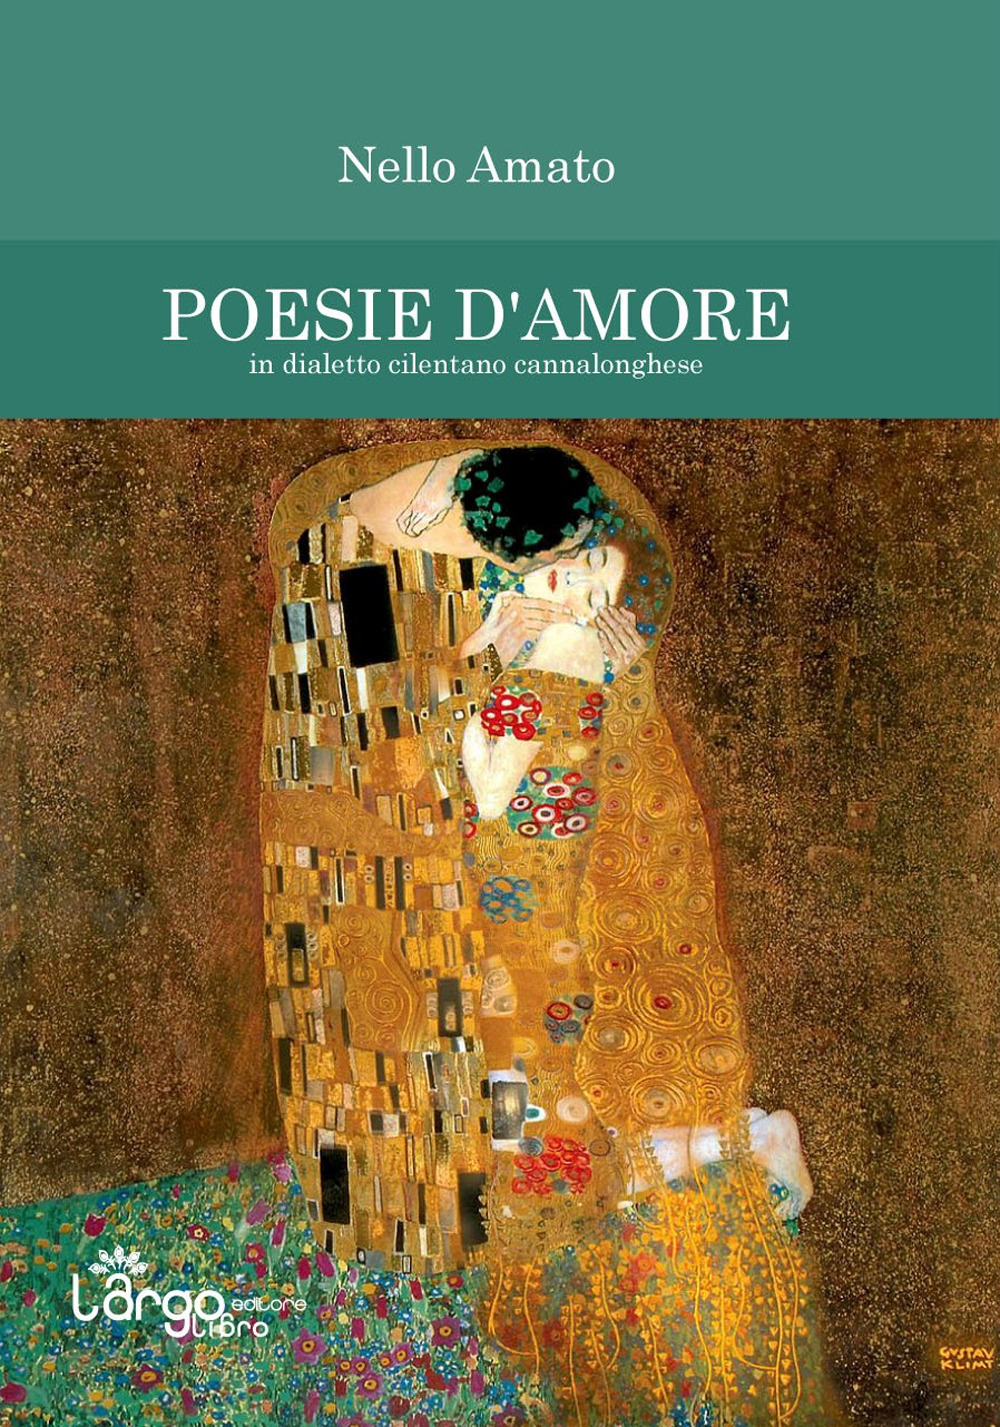 Poesie d'amore. In dialetto cilentano cannalonghese